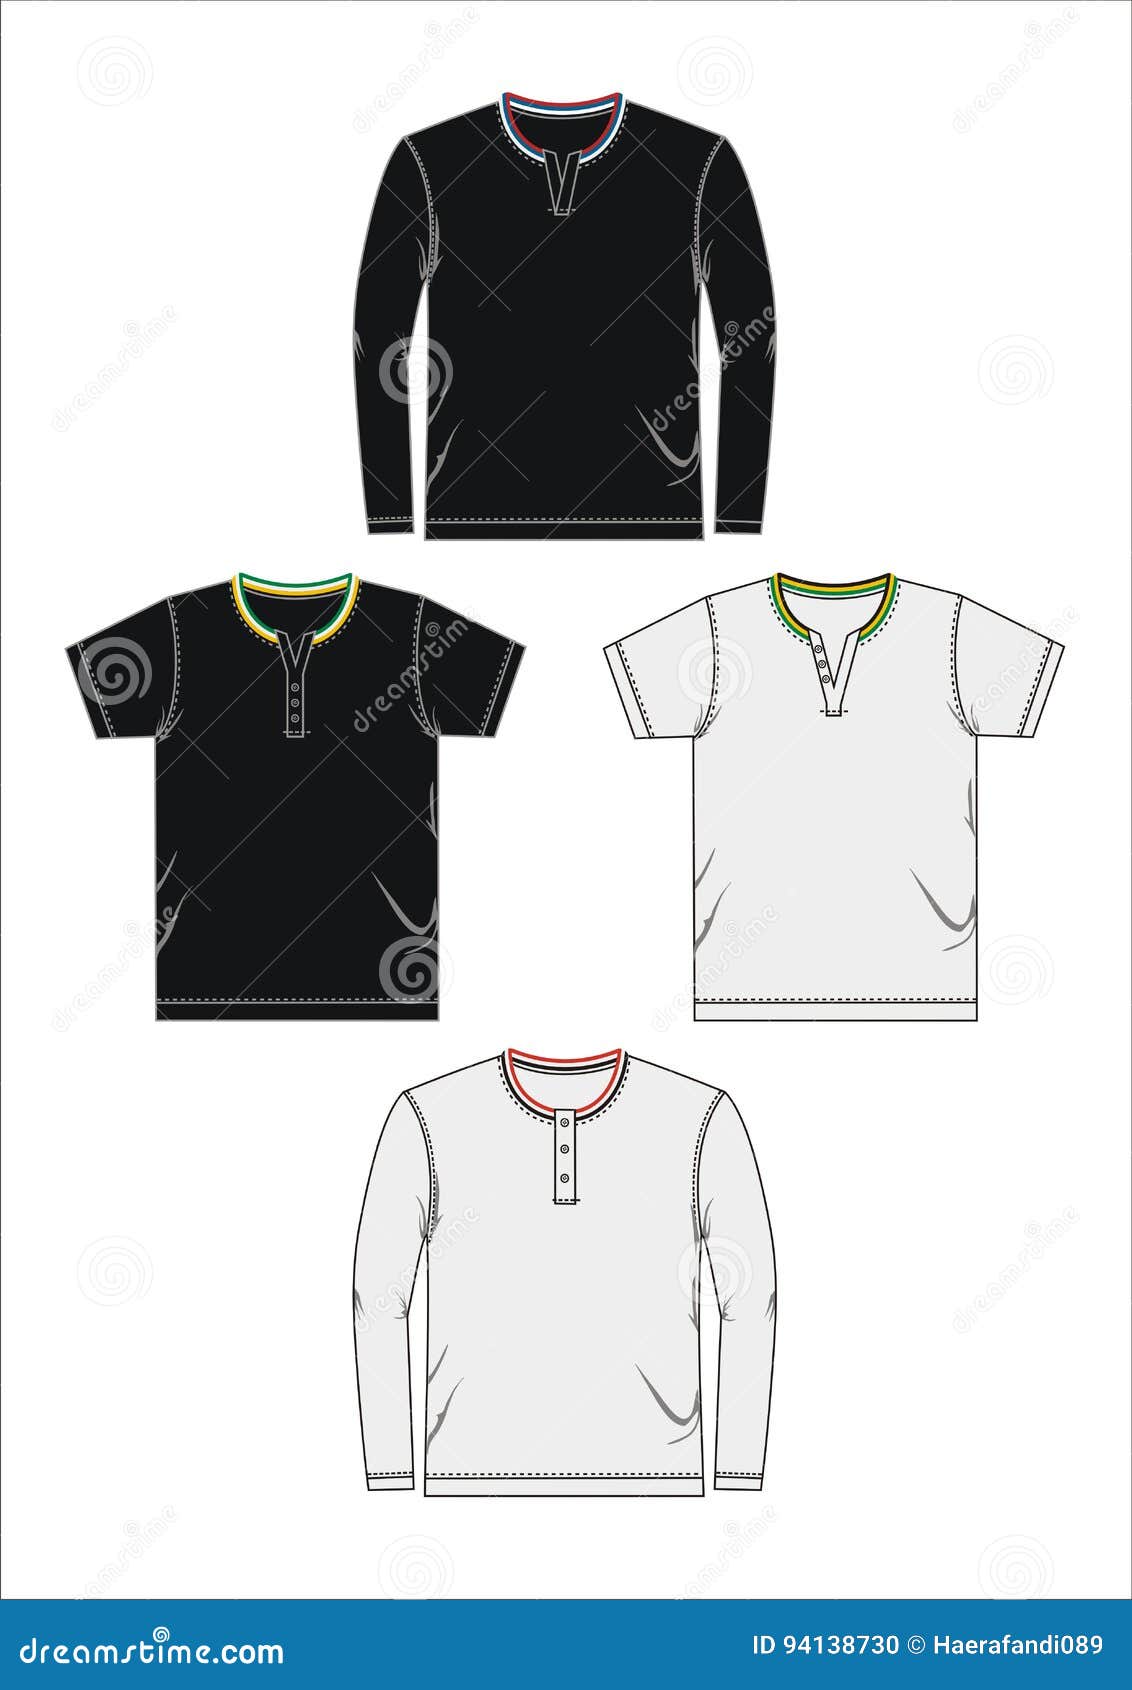 Polo shirt template stock vector. Illustration of icon - 94138730